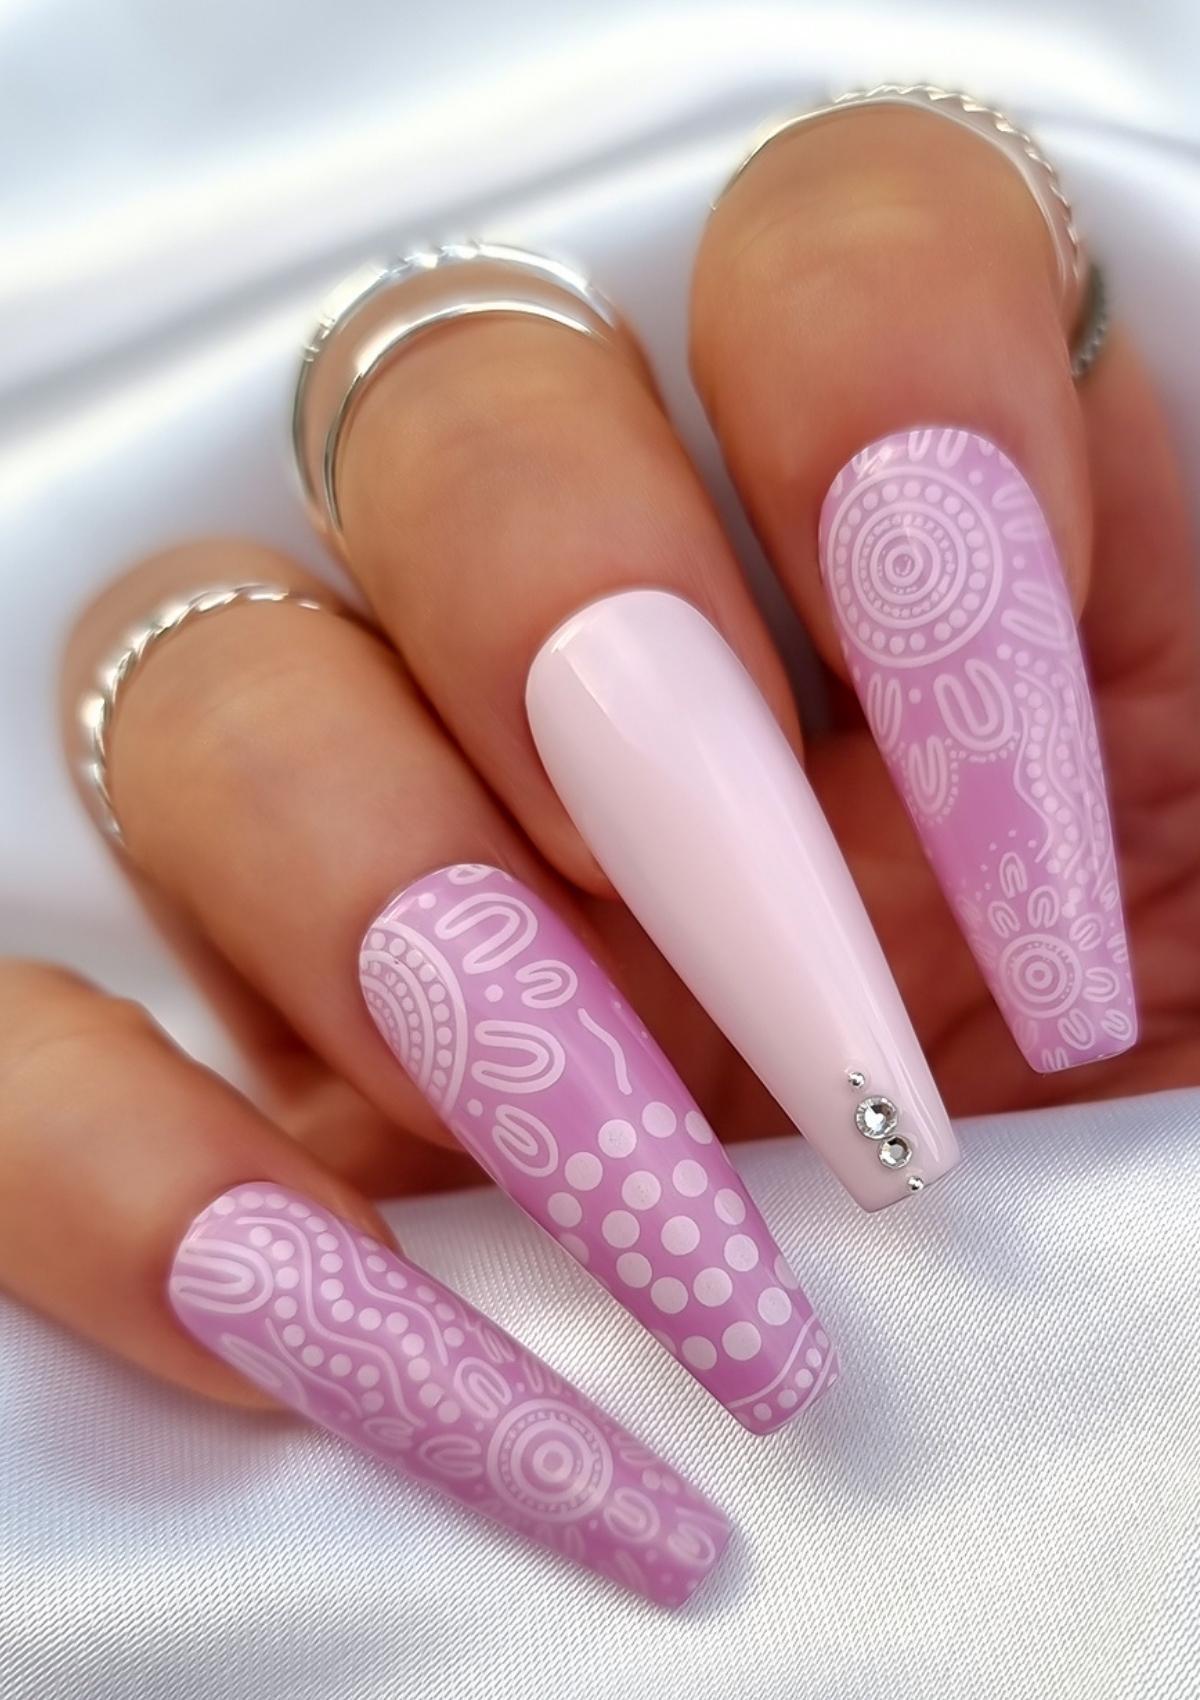 Cute pink and clear flower acrylic nails | Girls nail designs, Wow nails,  Nails